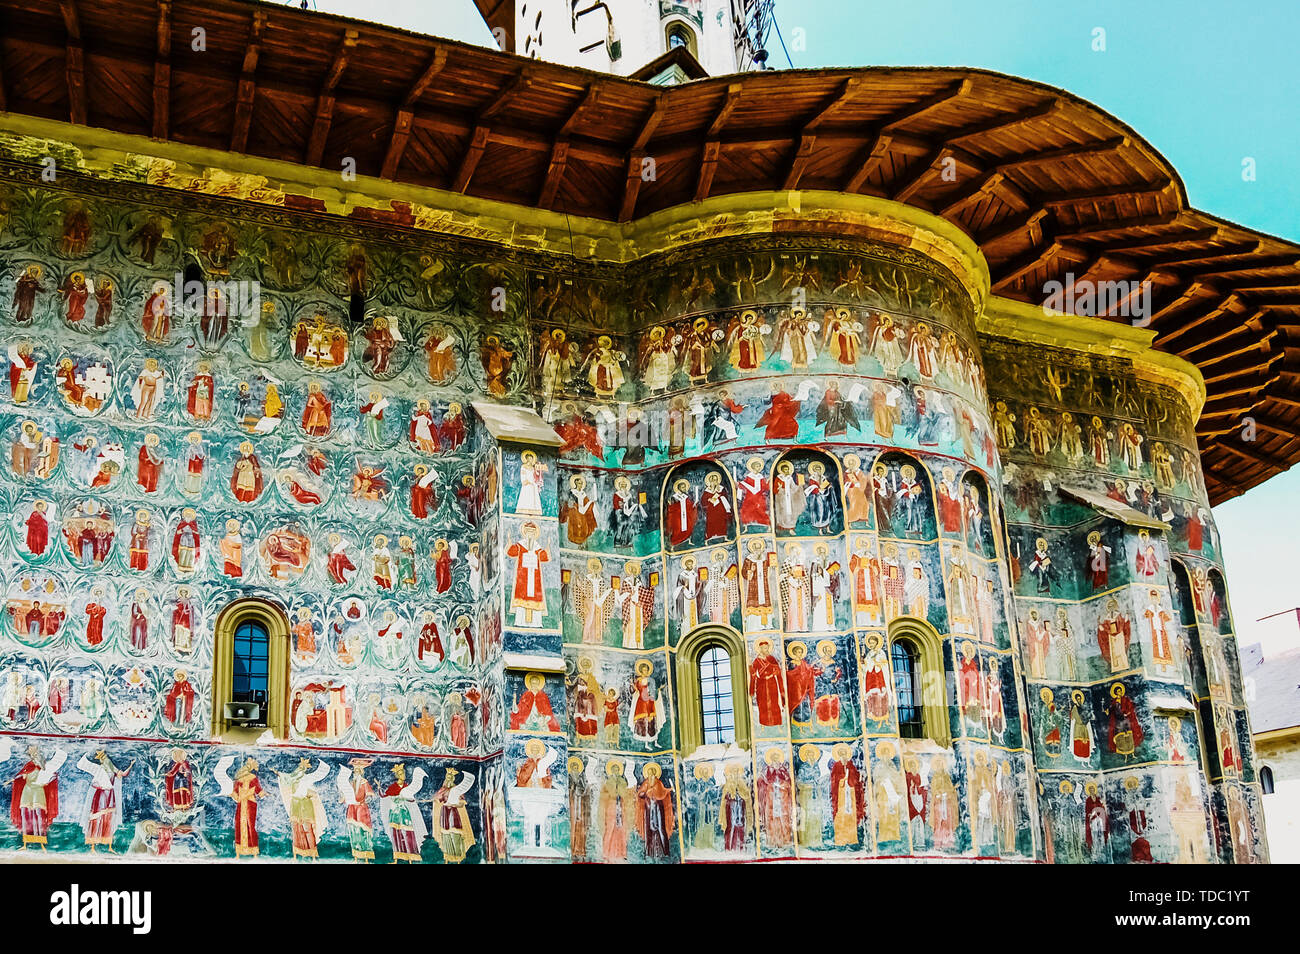 Bucovina, Romania - June 5, 2019: Paintings in frescoes of religious, colorful motifs, in Orthodox Christian monasteries of Bucovina. Stock Photo